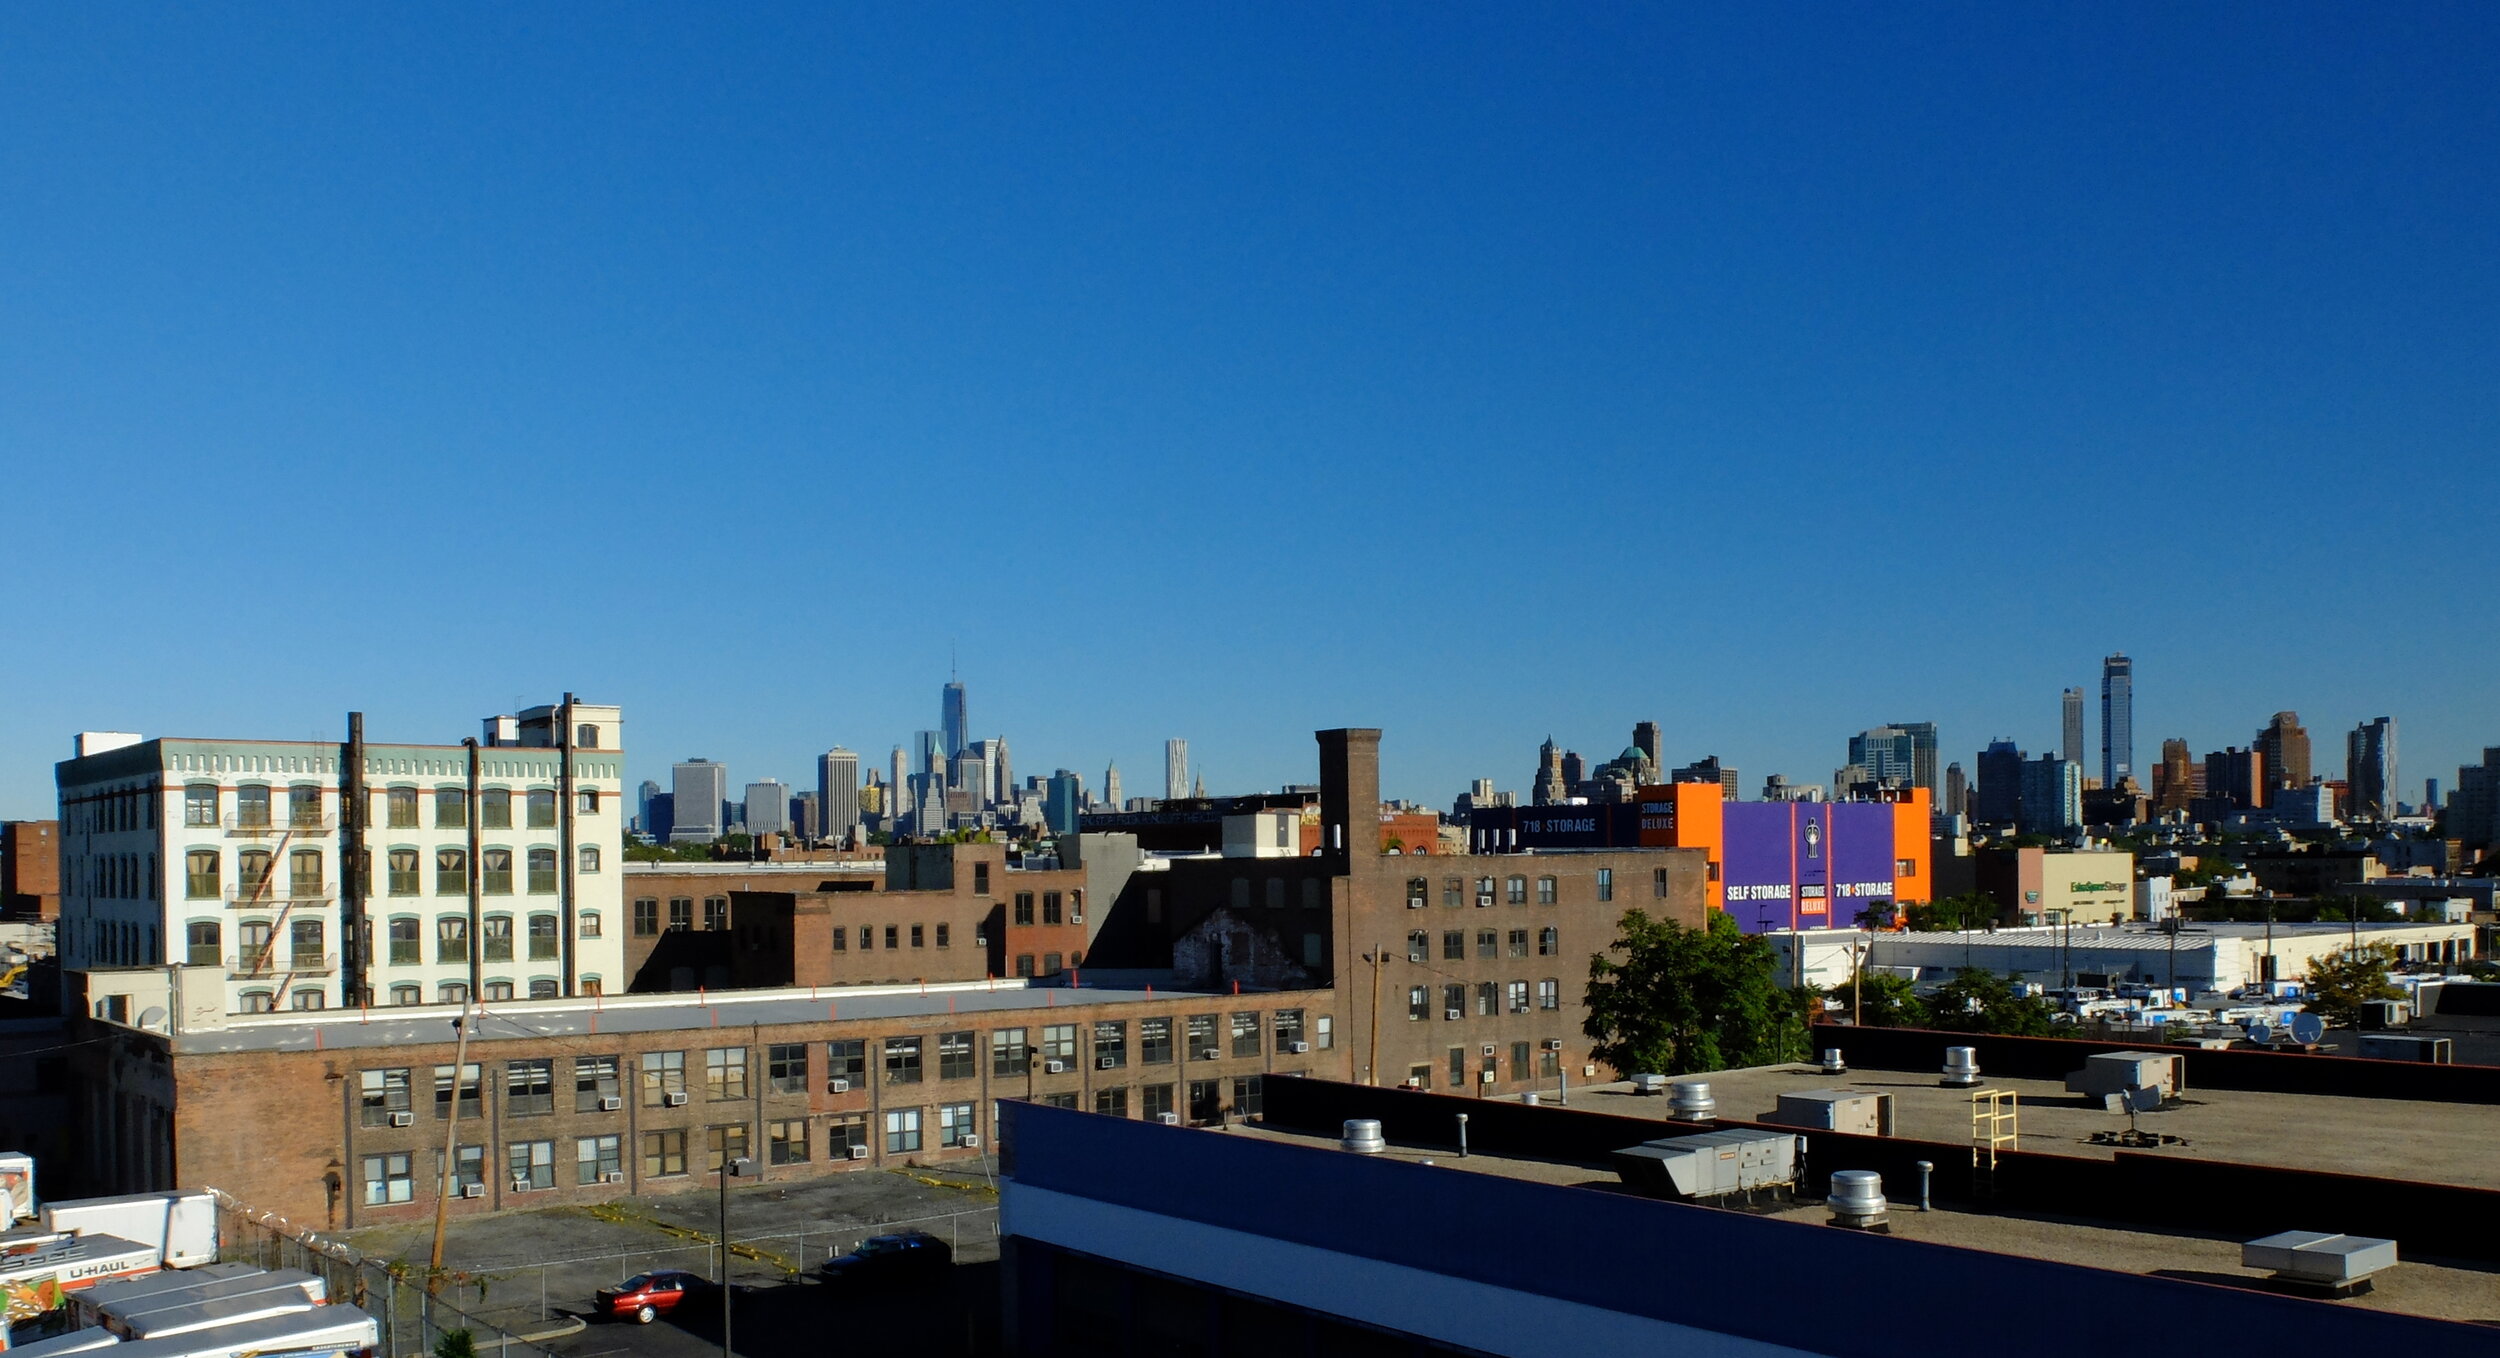 From Hotel Le Beu, Park Slope, B'klyn Sept. 2013.